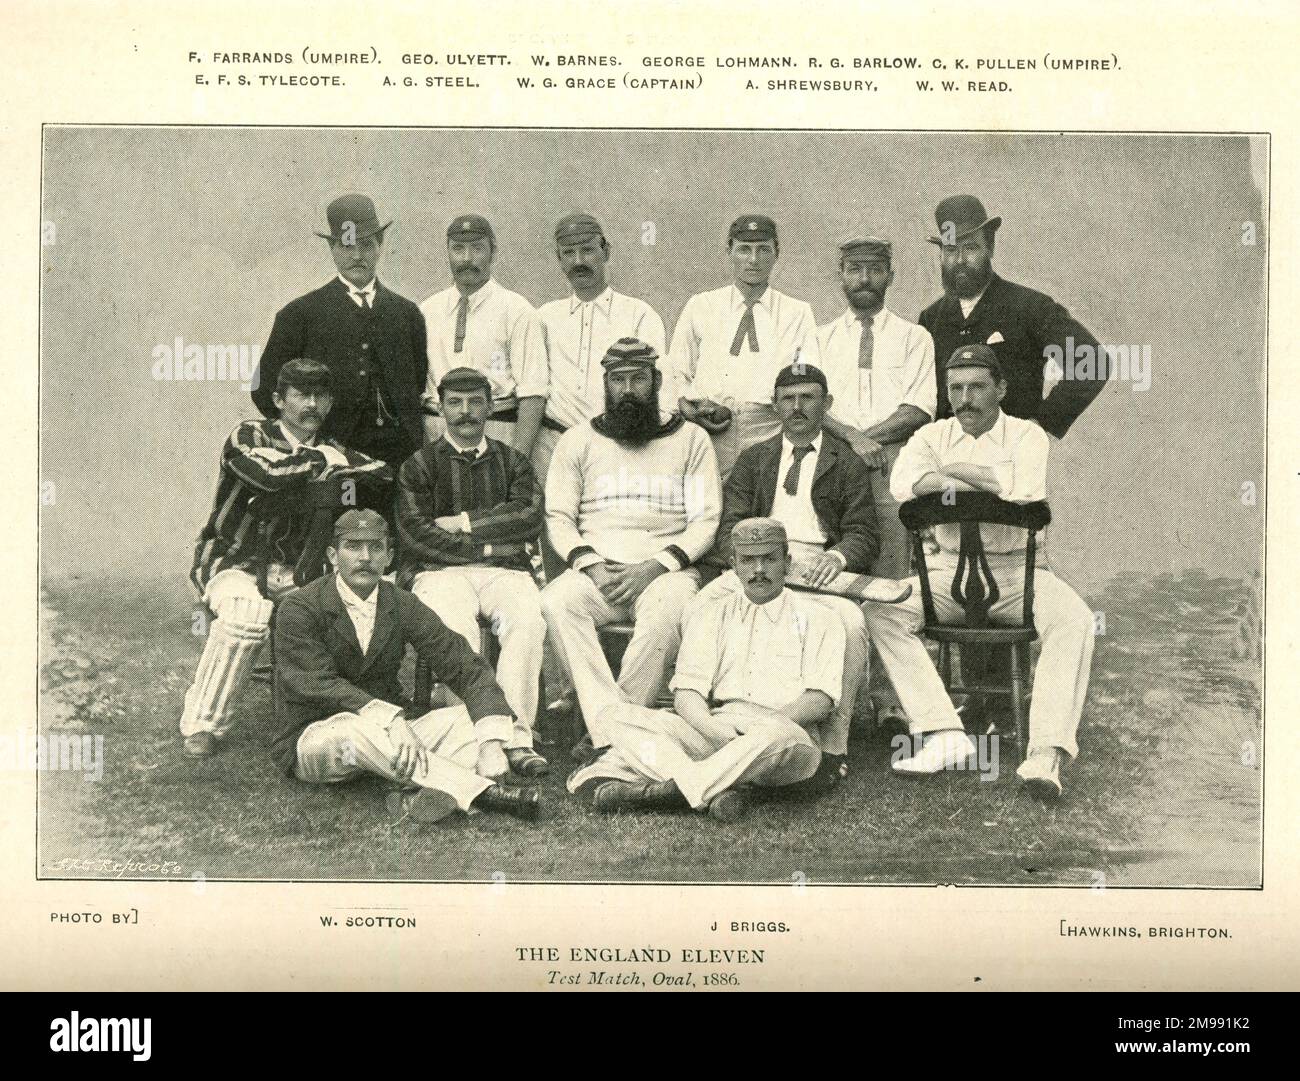 The England Cricket Team, Oval Test Match, 1886. Foto Stock